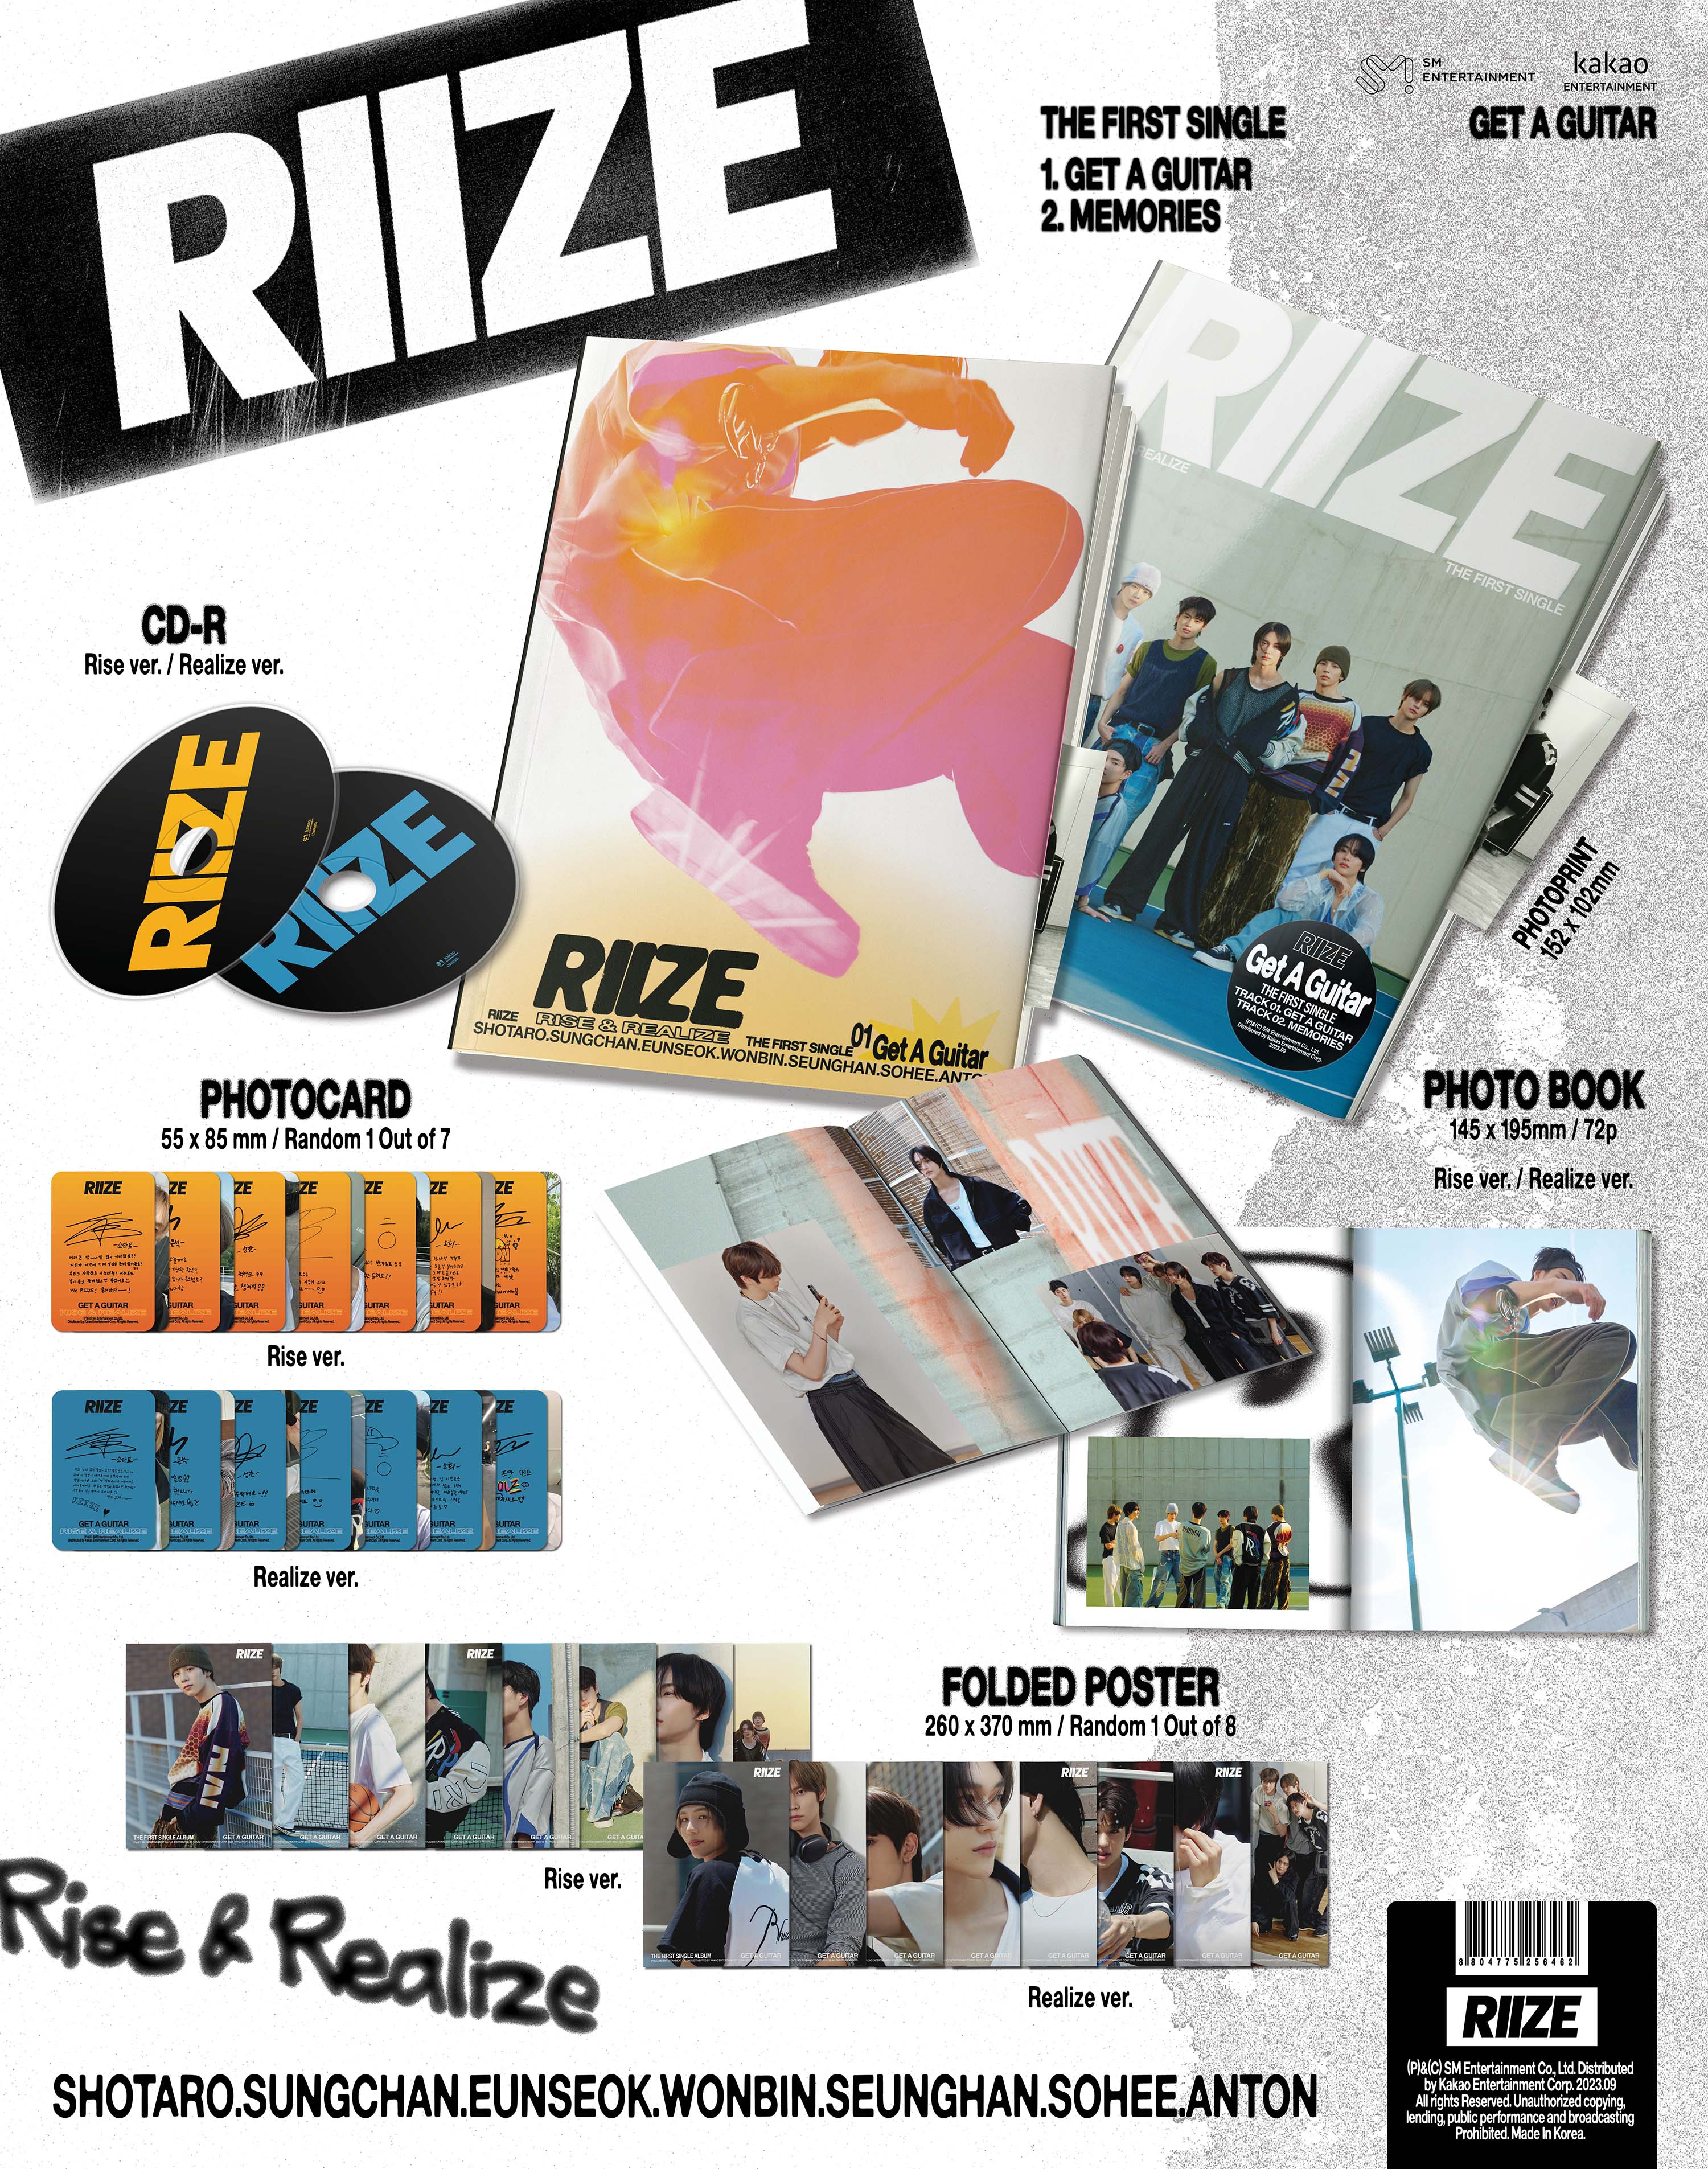 RIIZE The 1st Single Album [Get A Guitar] SPECIAL GIVEAWAY EVENT Makestar